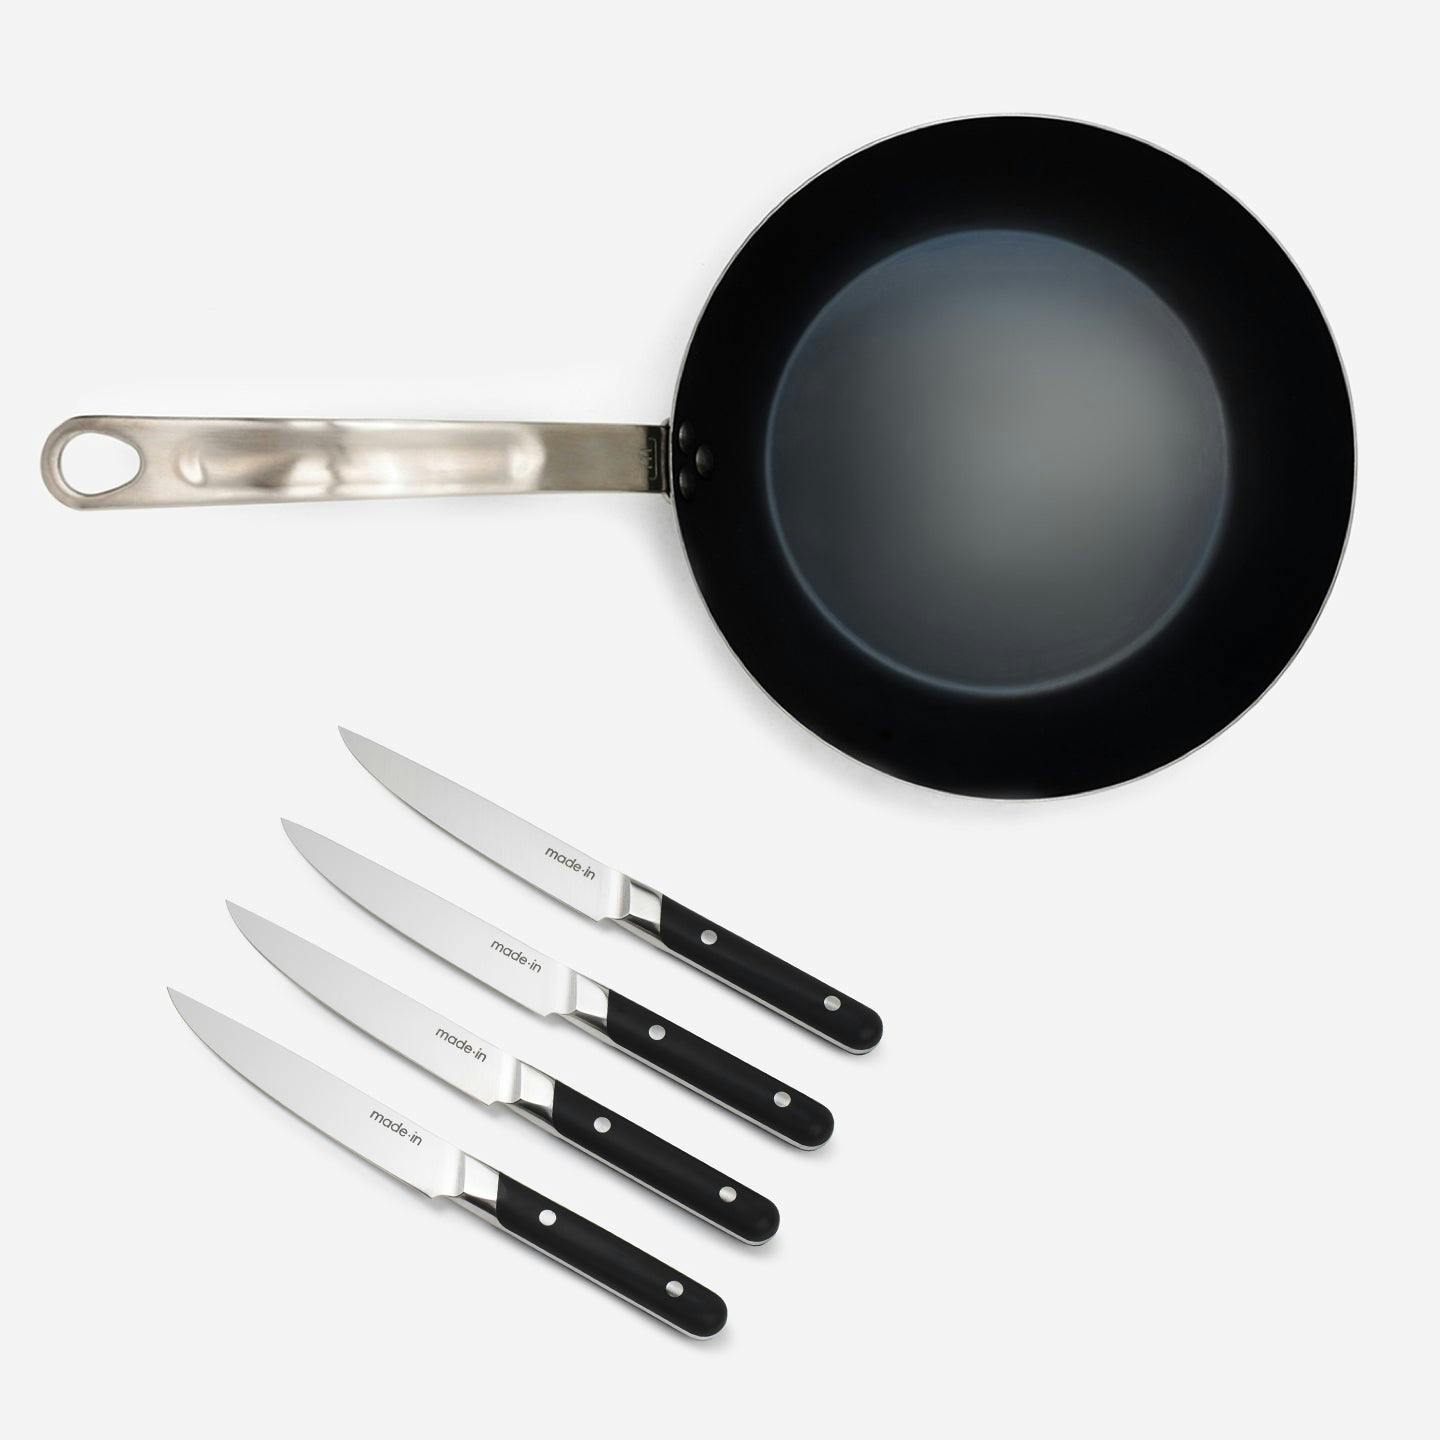 This set includes the tools Chef Tom will be using to cook a seared steak in the Giving Tuesday class. Featuring our 10" Carbon Steel Frying Pan and Steak Knives, you’ll be able to sear the perfect steak and make beautiful cuts. 